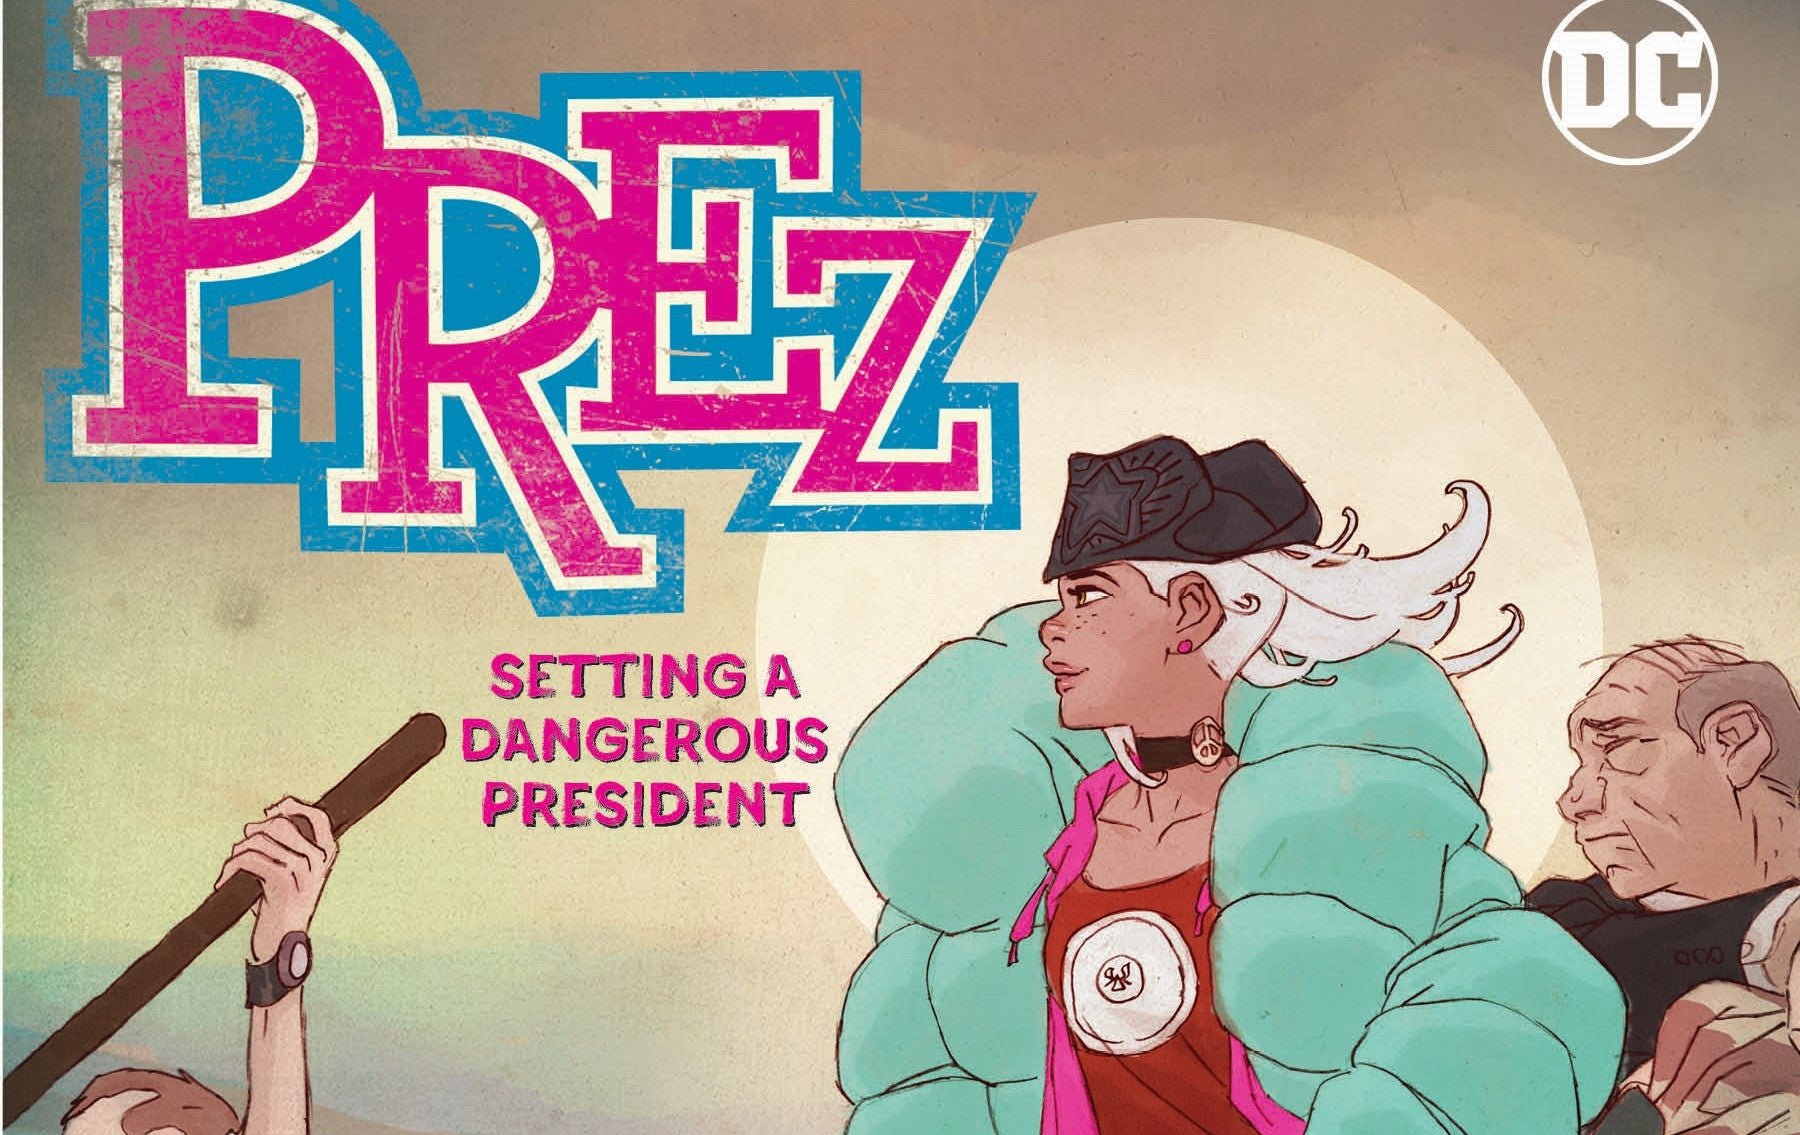 Cropped cover of new Prez graphic novel format